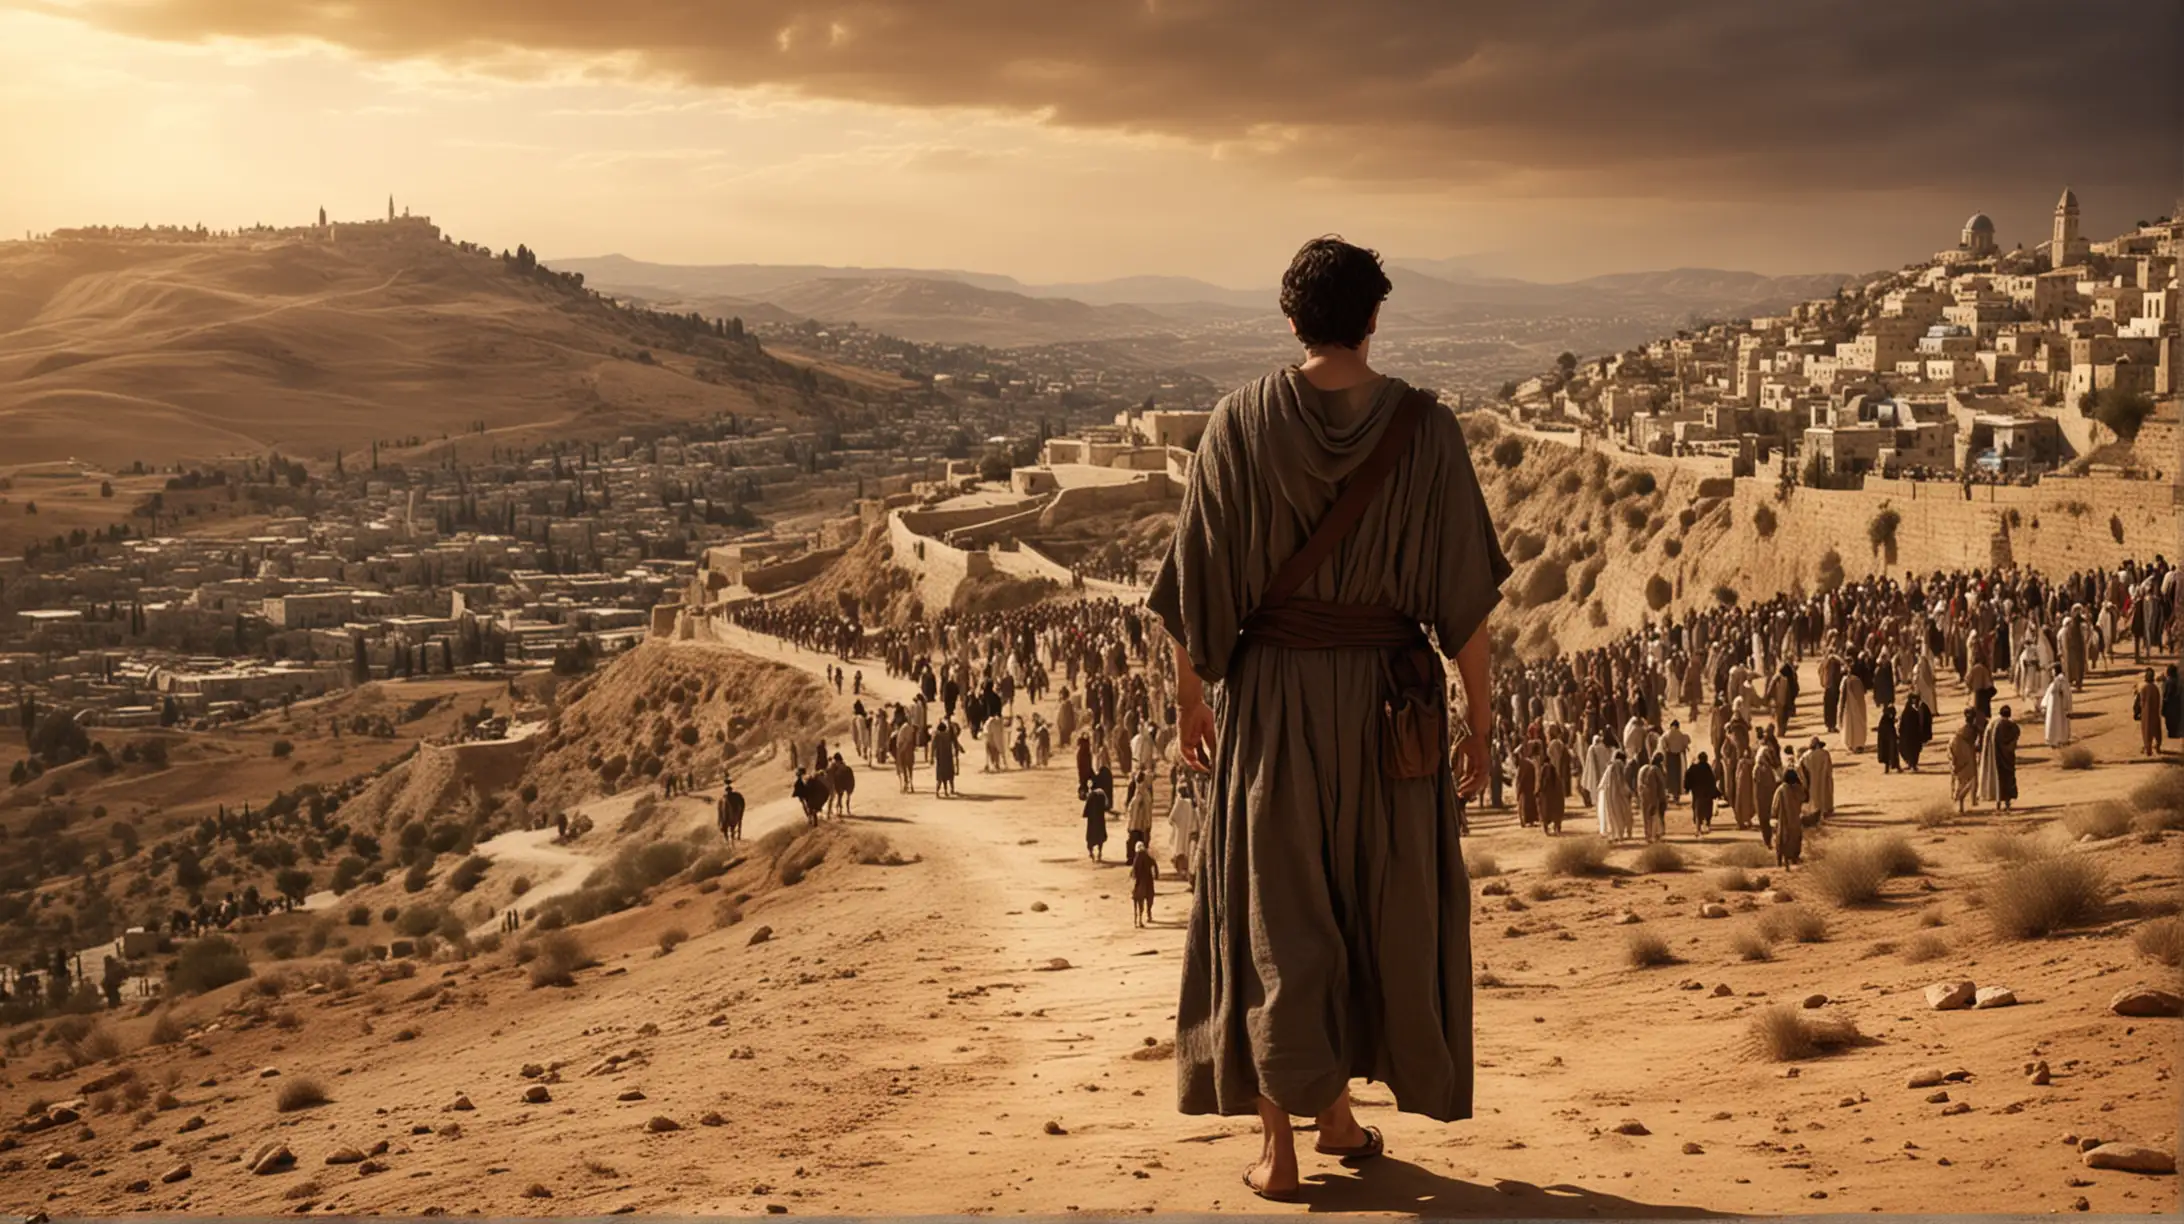 I need a iconic thumbnail image that represents Ezra from the Bible, Where he is standing on a desert hilly area leading people to Jerusalem.